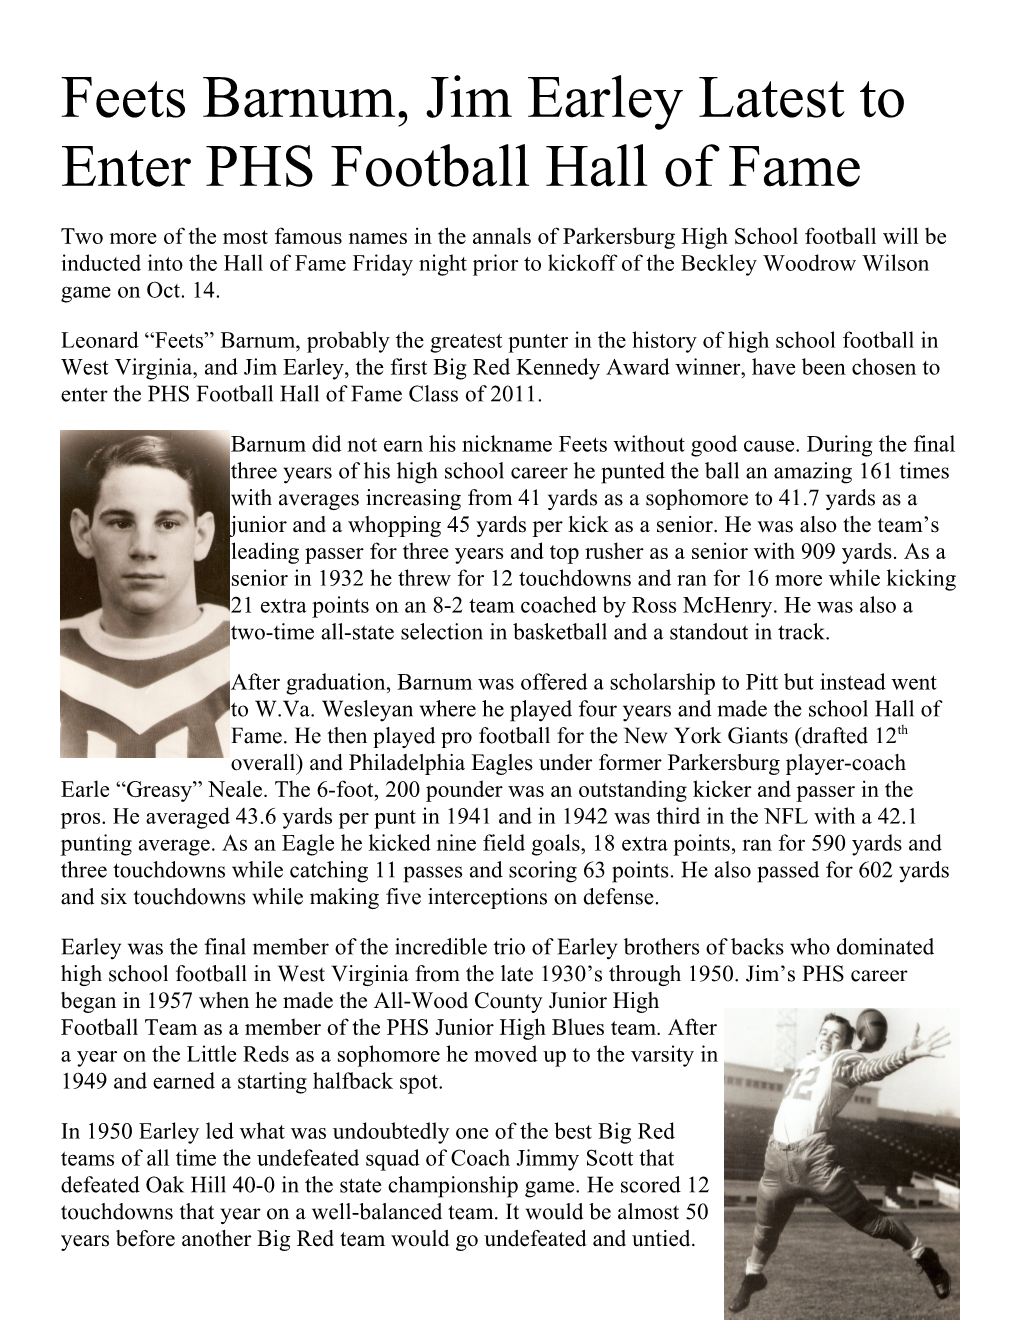 Virden, Bargeloh Latest PHS Football Hall of Fame Inductees